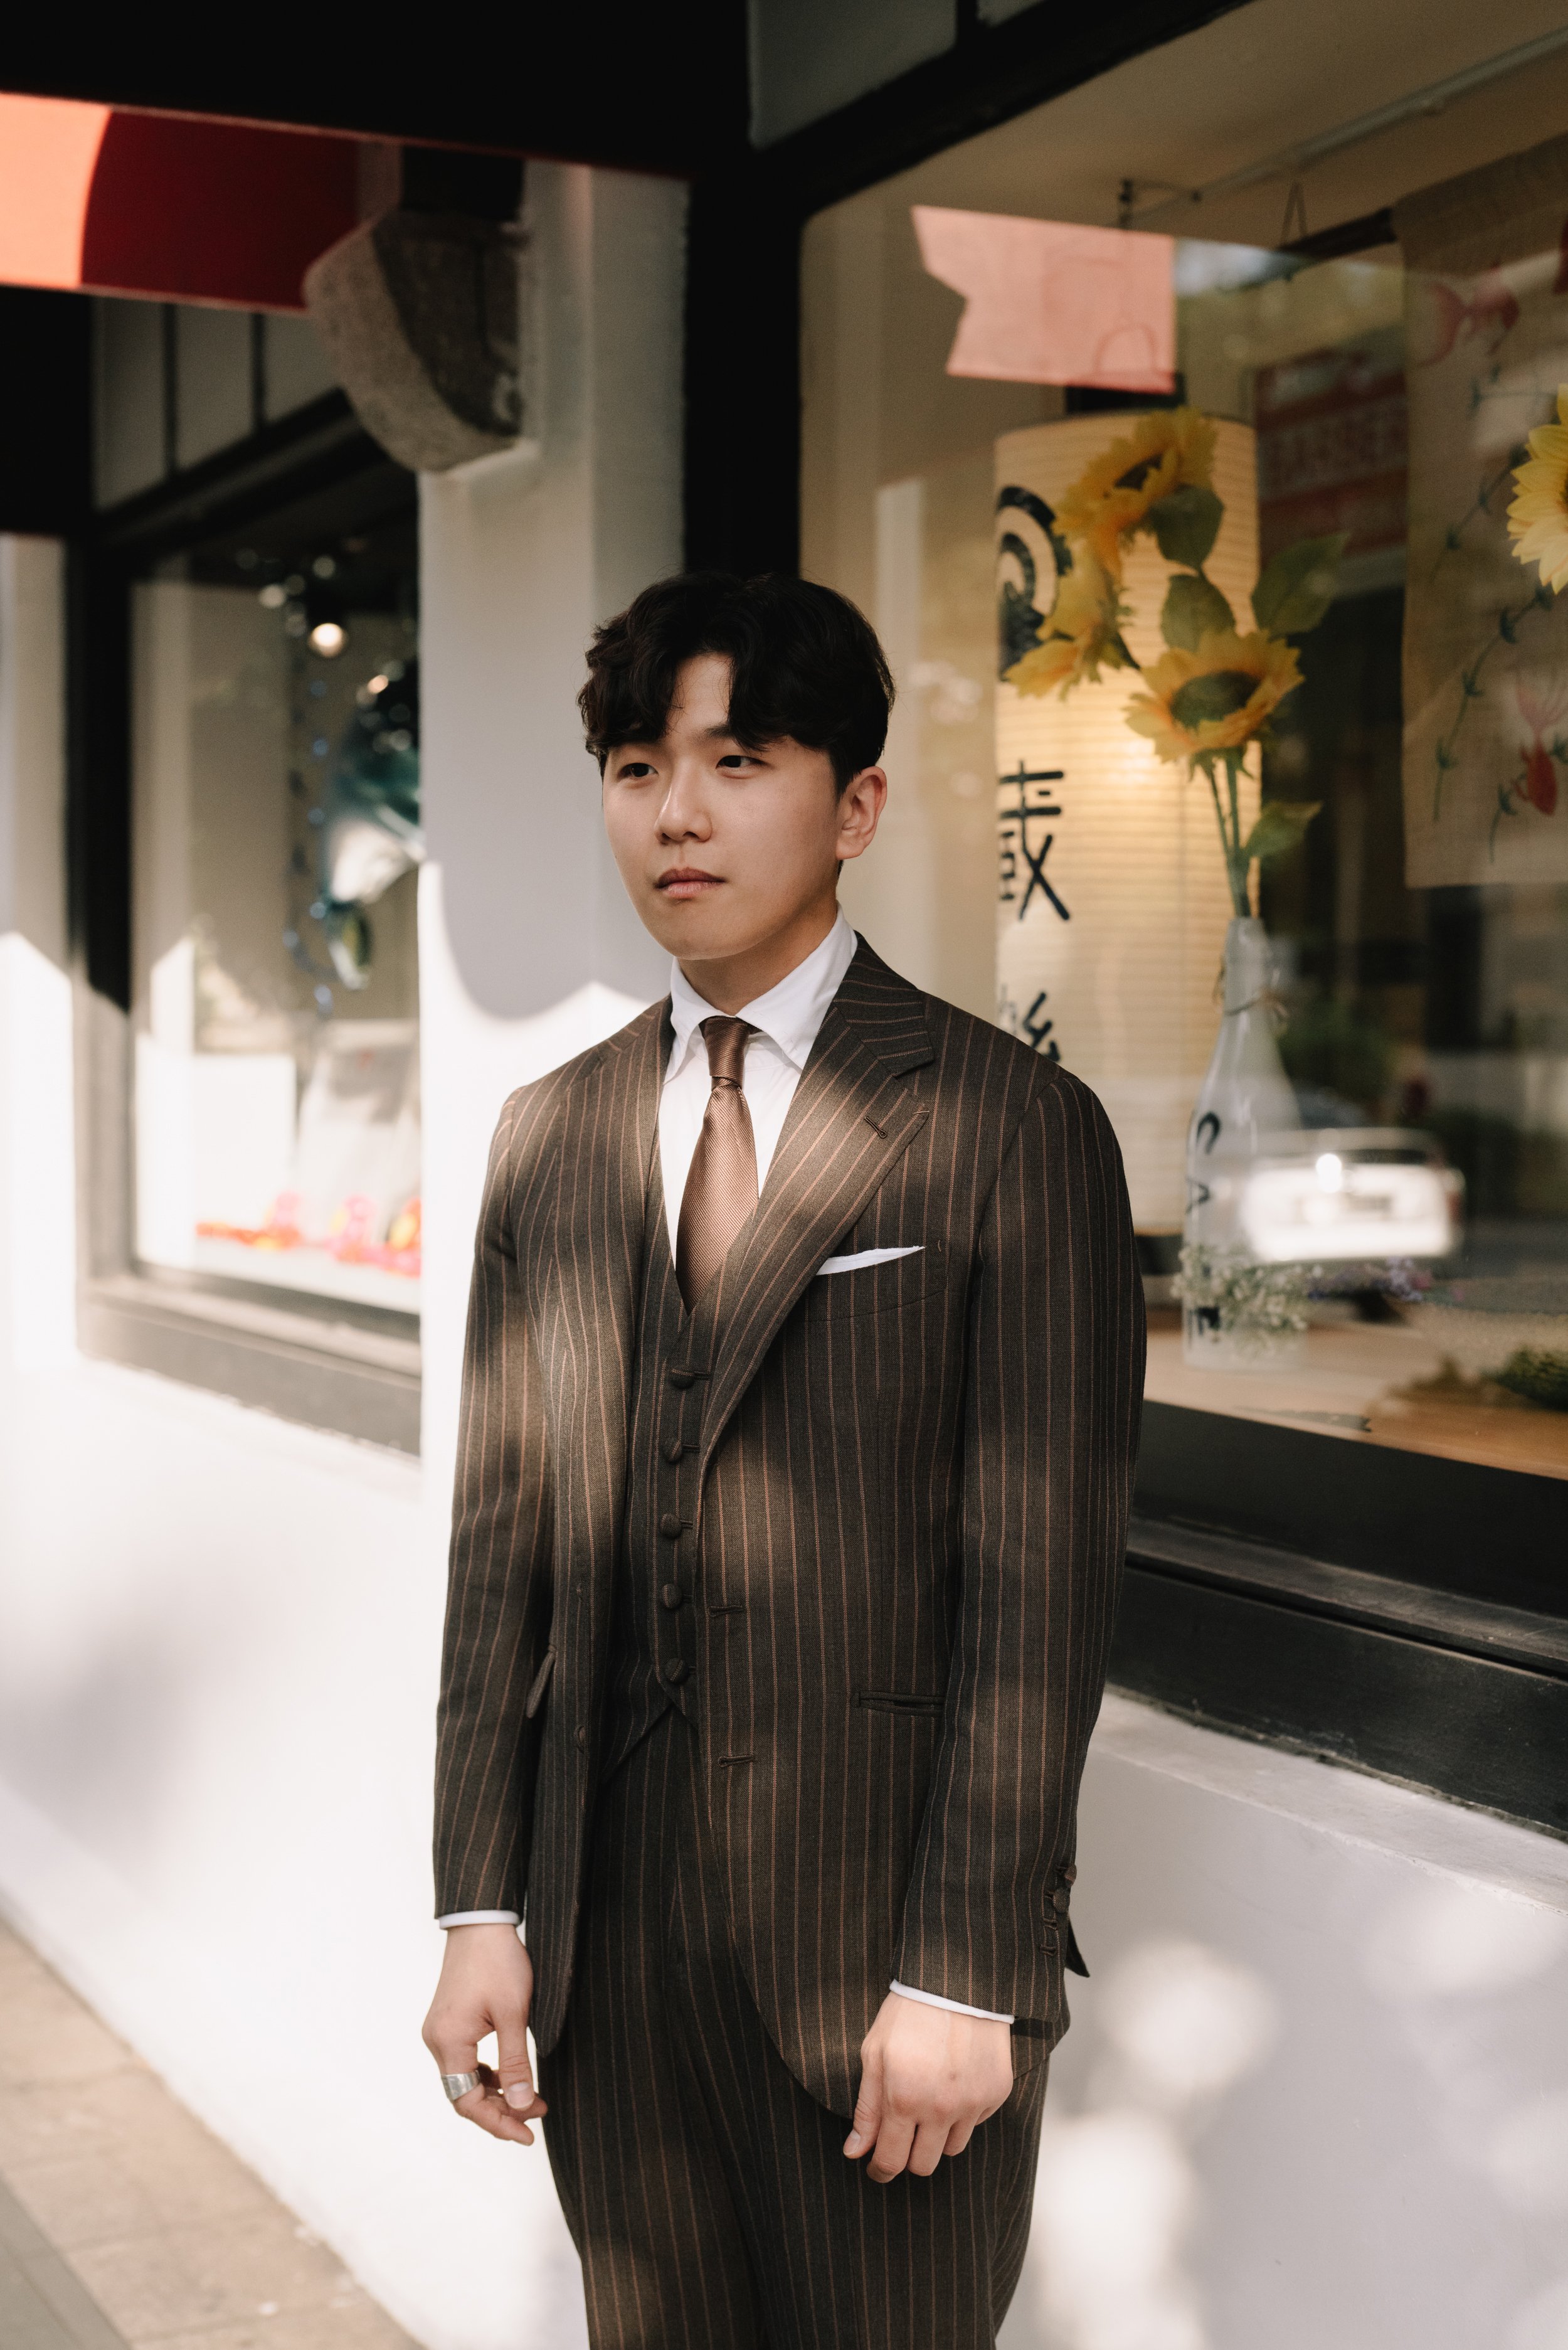 Benjamin Tay Foxbrothers Made Suits Singapore Tailor Made Suits Kirintailor made in japanss.jpg